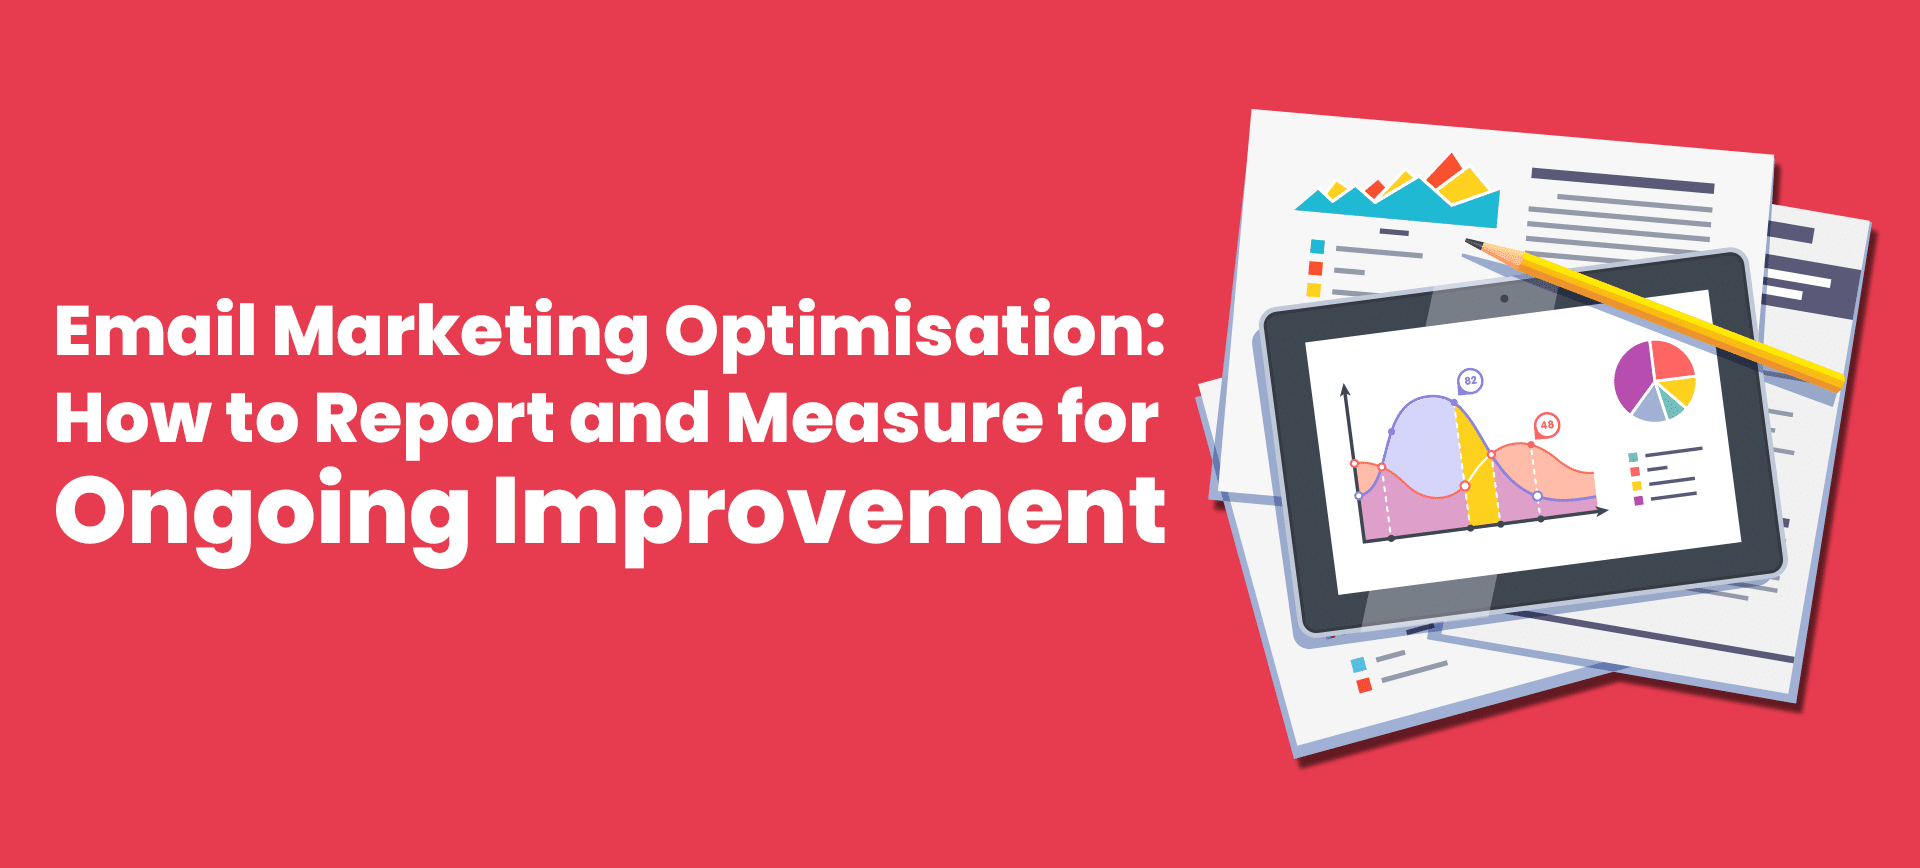 Email Marketing Optimisation:  How to Report and Measure for Ongoing Growth